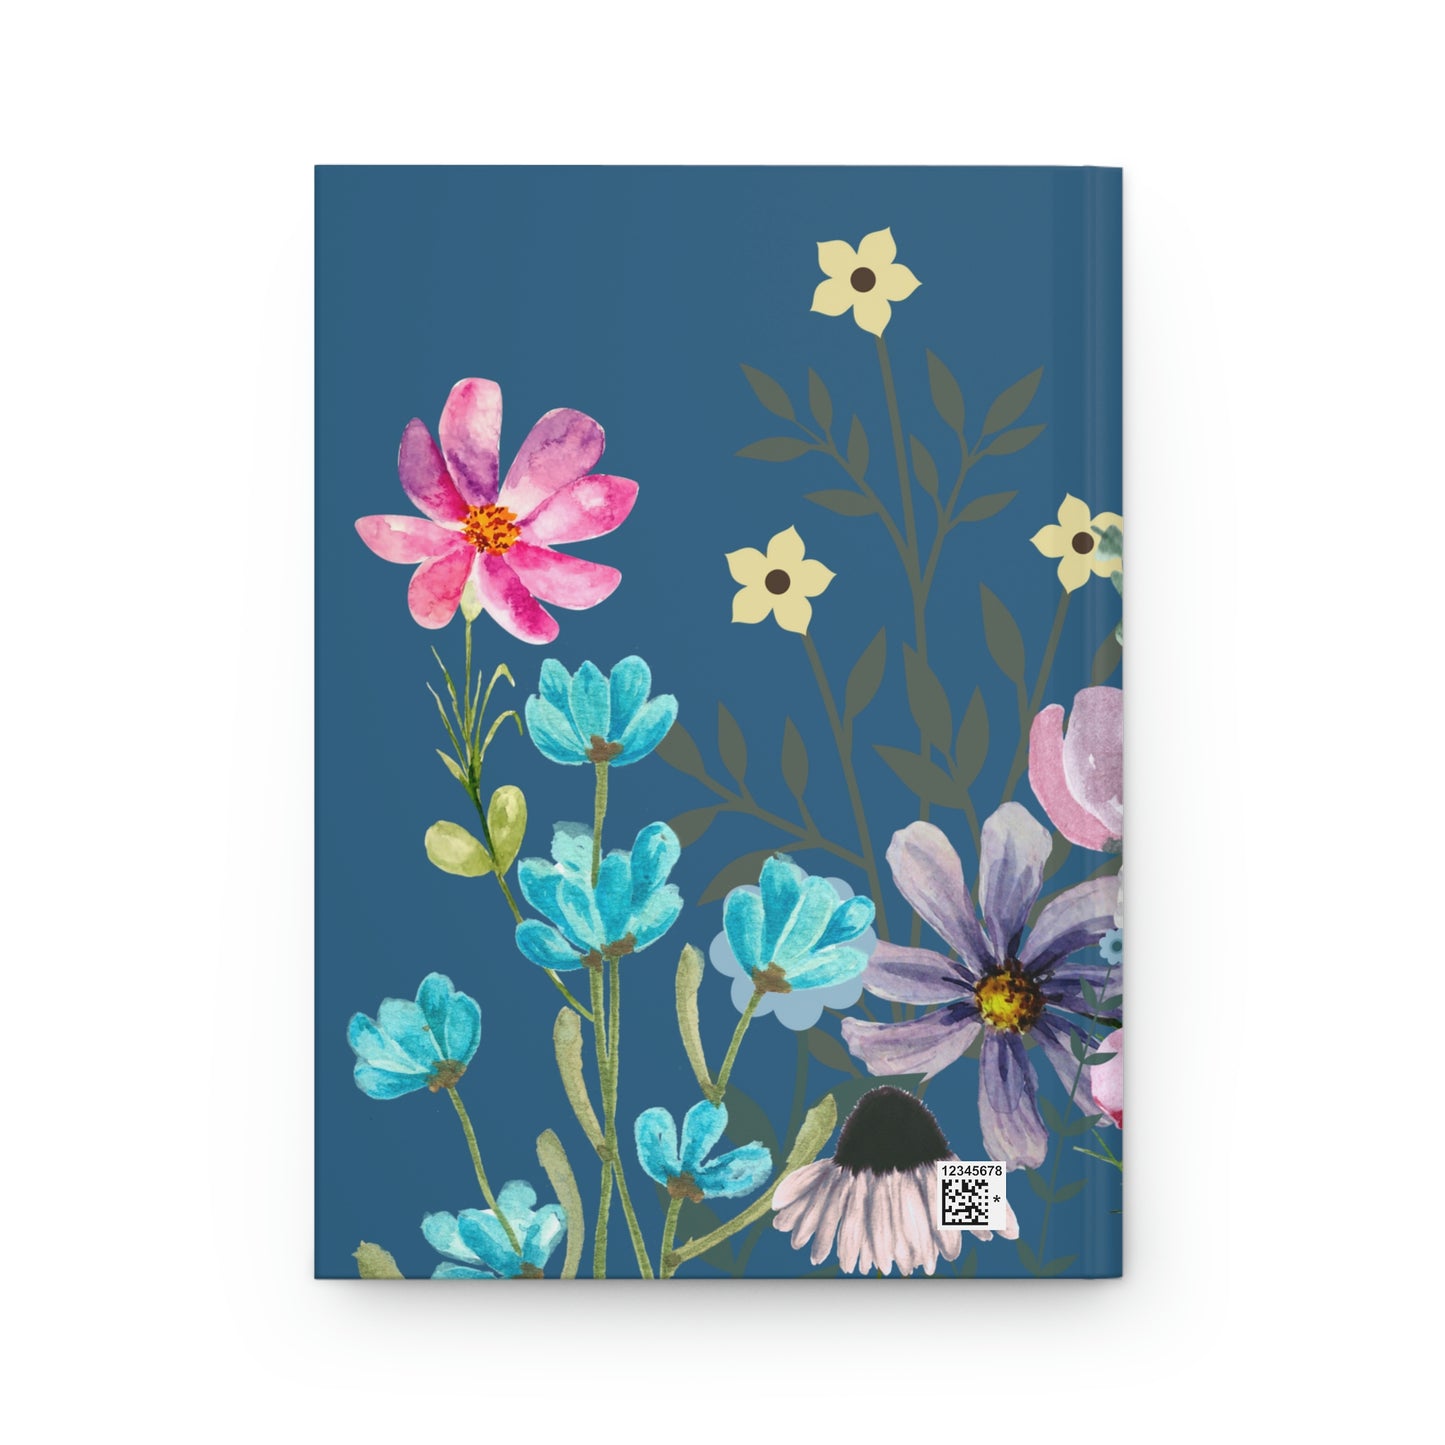 Women's Personalized Journal / Wildflower Hard Cover Journal